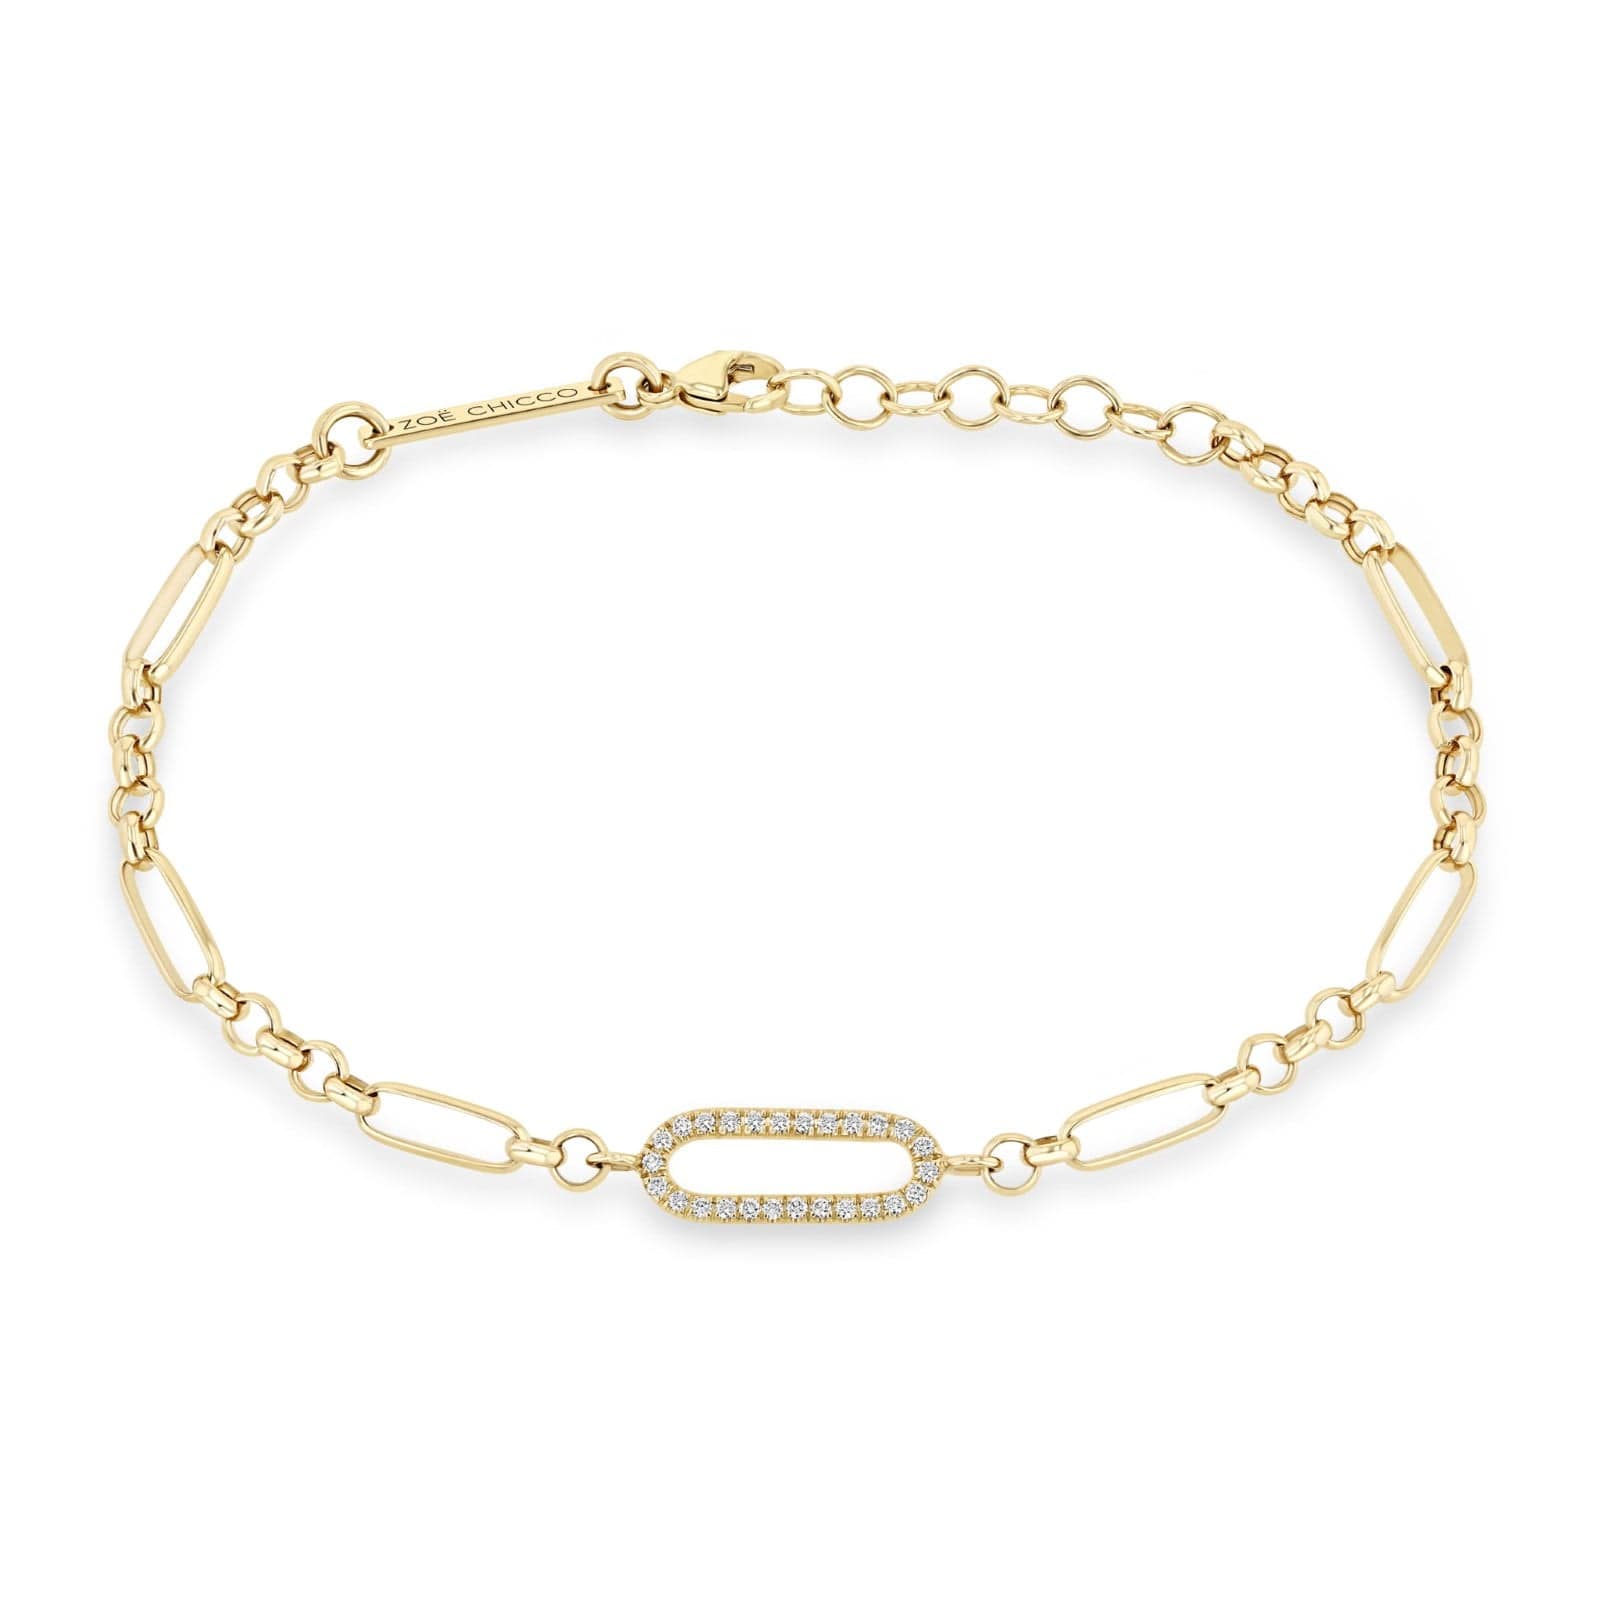 14K Yellow Gold Paperclip and Rolo Chain Bracelet with Pave Diamond Link